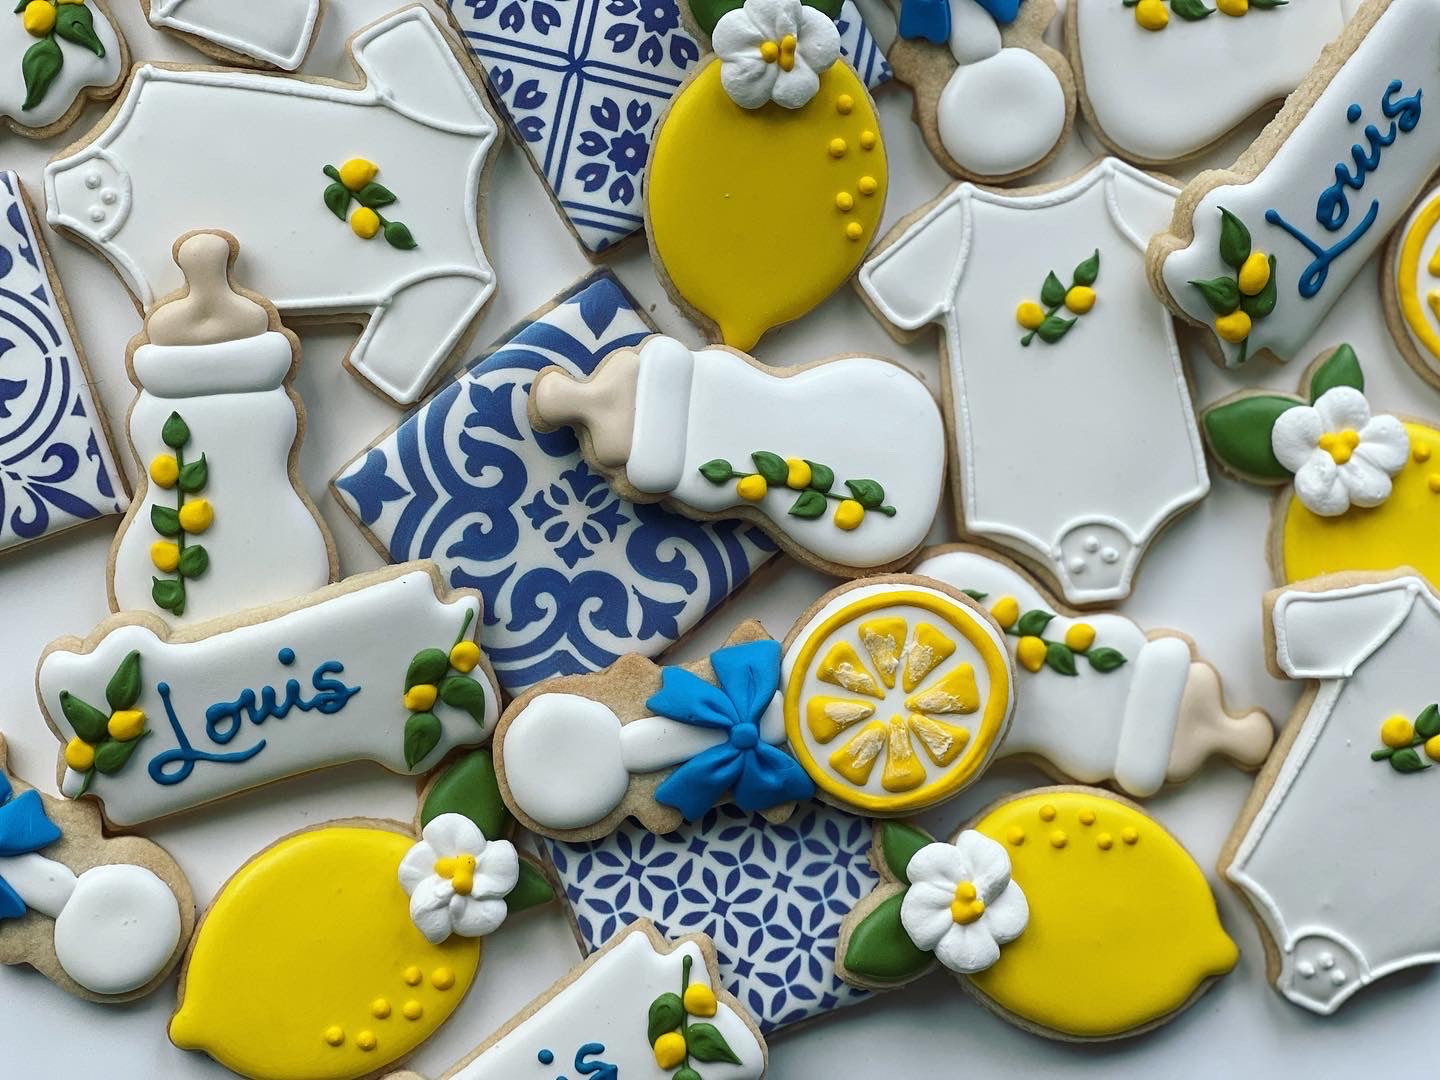 Louis Vuitton Cookies, Simply Sweet Creations